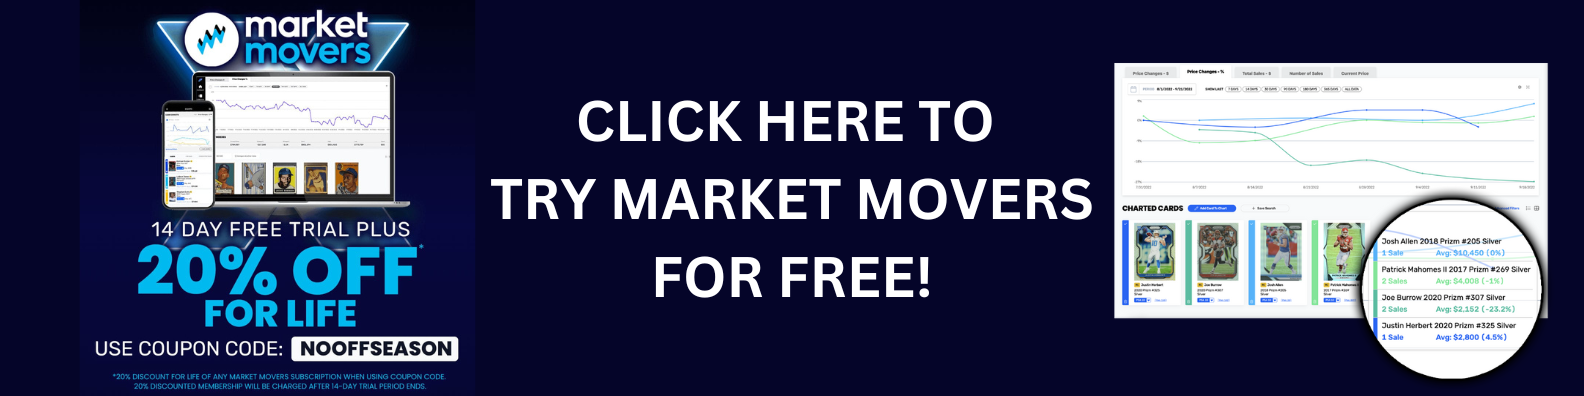 Market Movers Banner